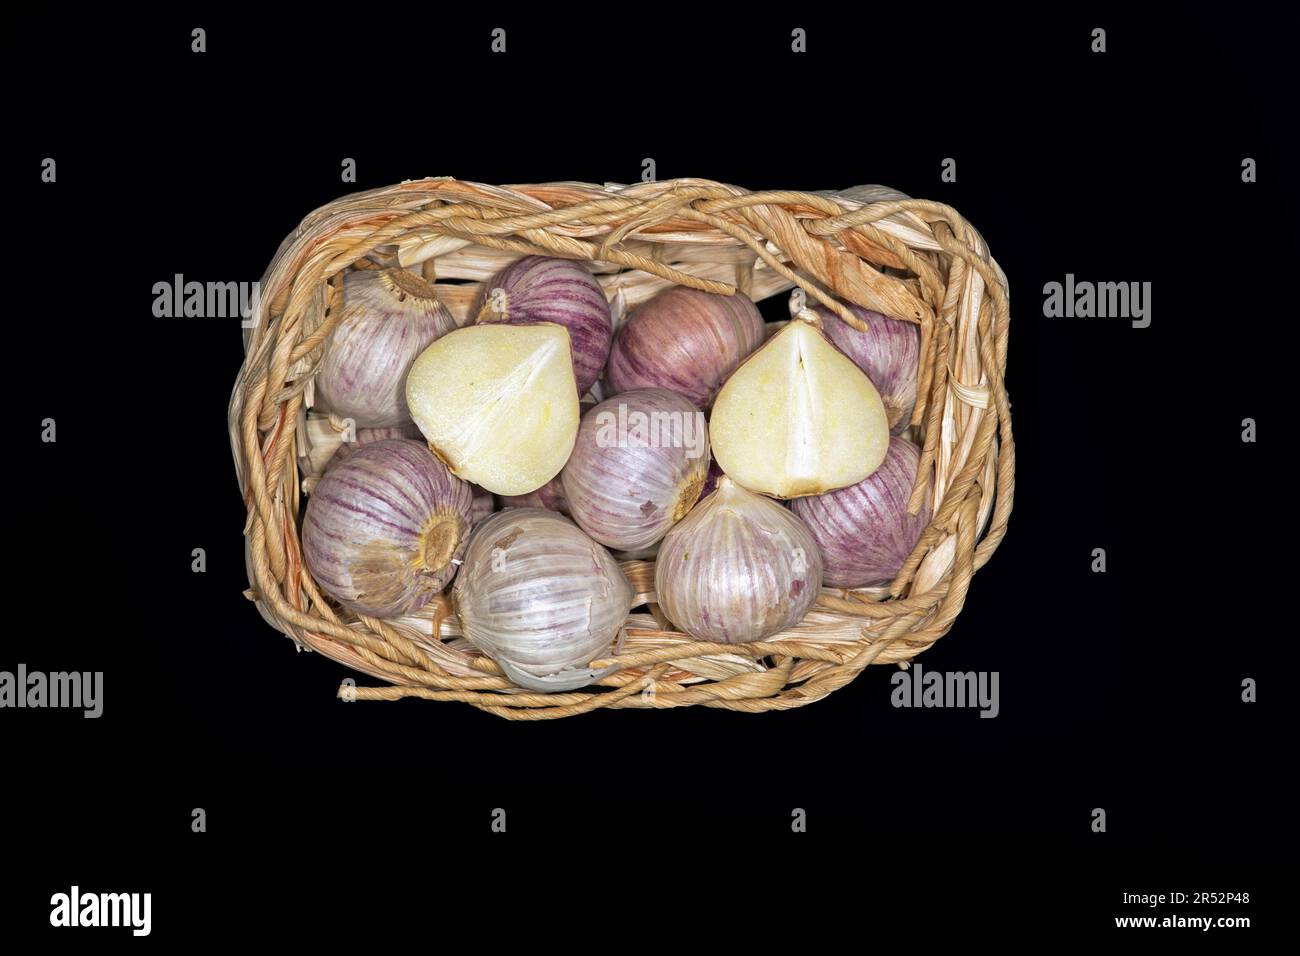 Tubers of alpine broad-leaf allium (Allium victorialis) in a woven basket, food photography with black background Stock Photo